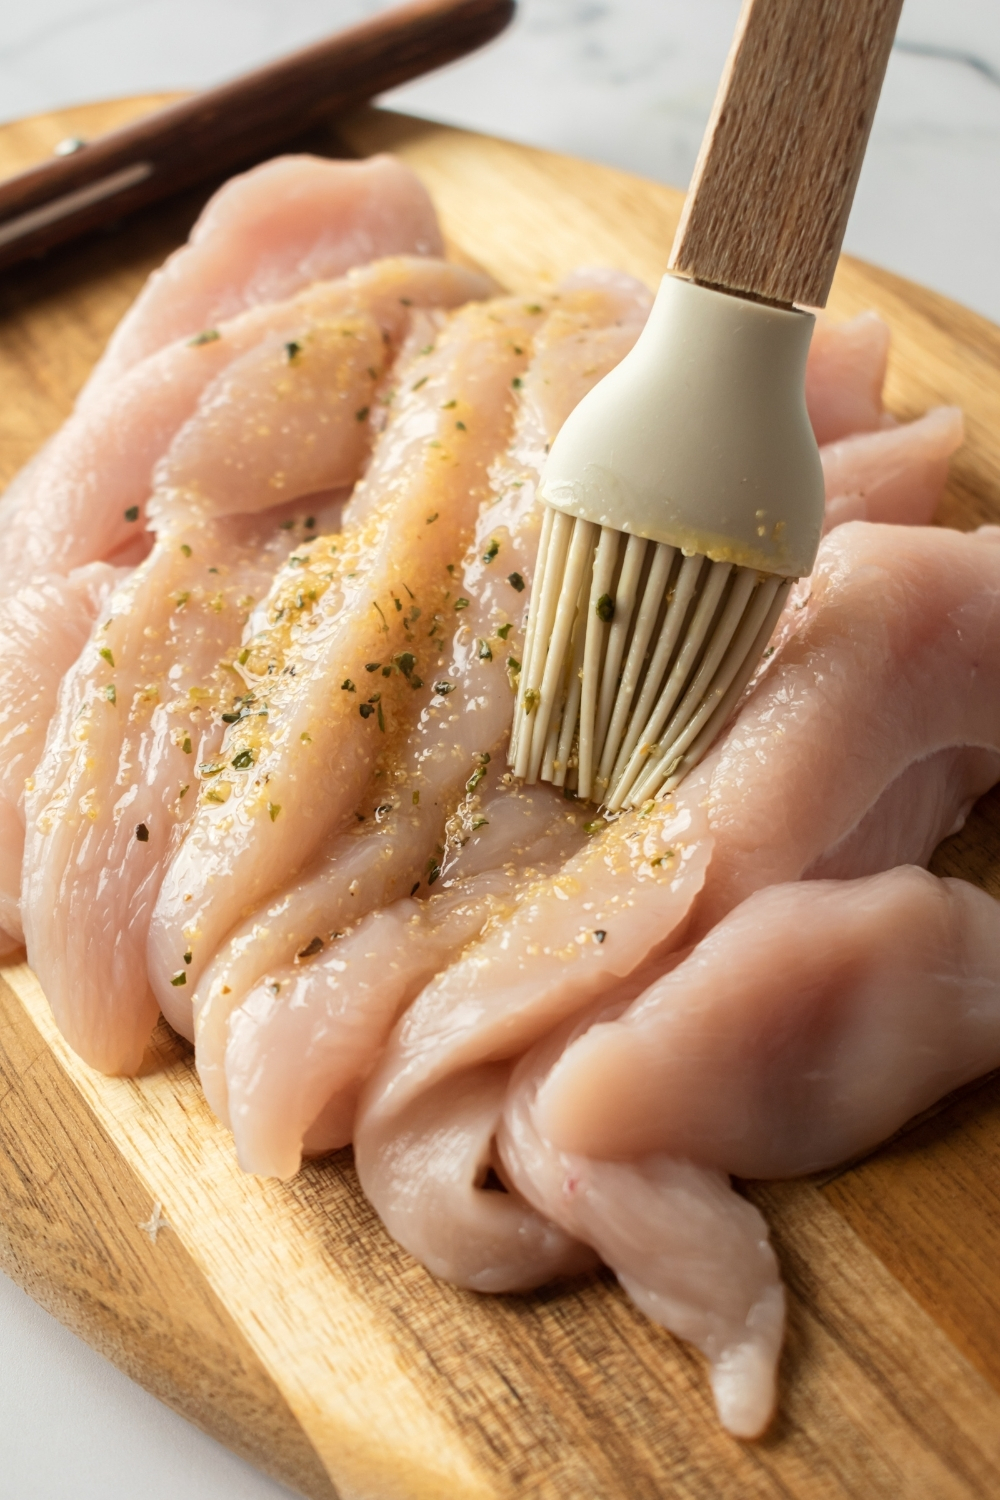 Raw chicken tenders on a wooden cutting board being brushed with an olive oil seasoning mixture.